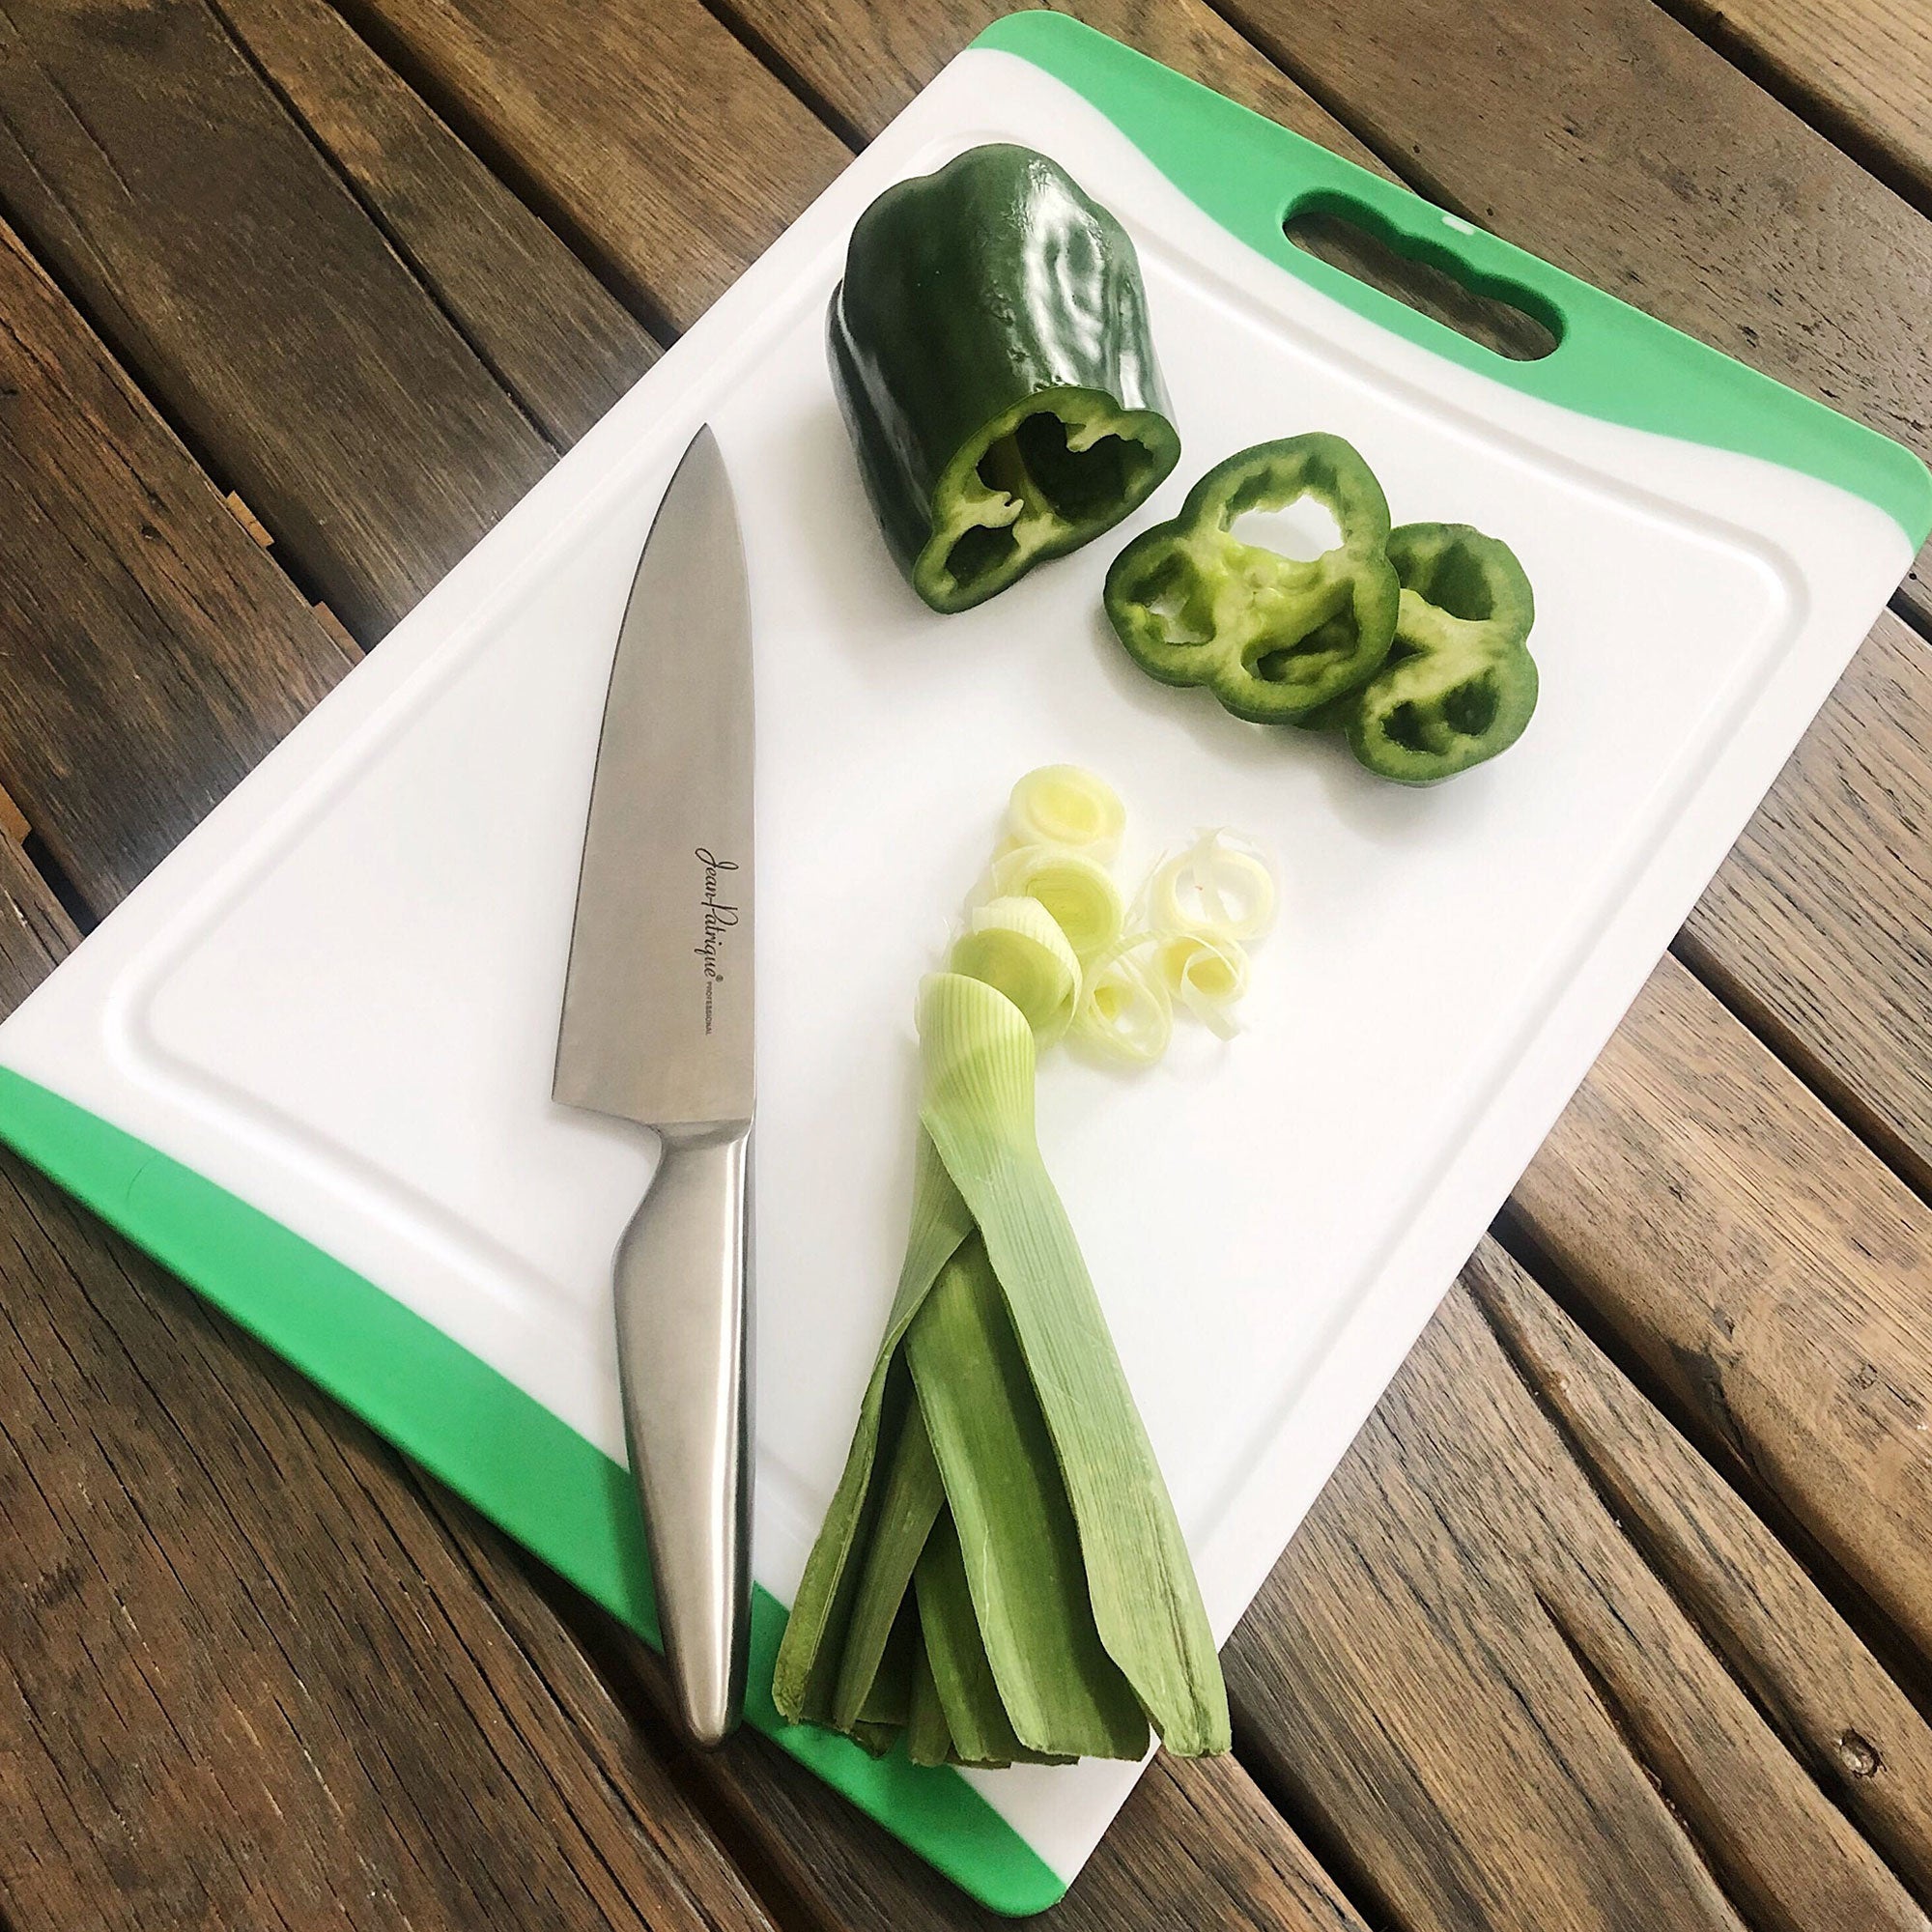 Large Plastic Chopping Board - Green 16.9 Inch – Jean Patrique